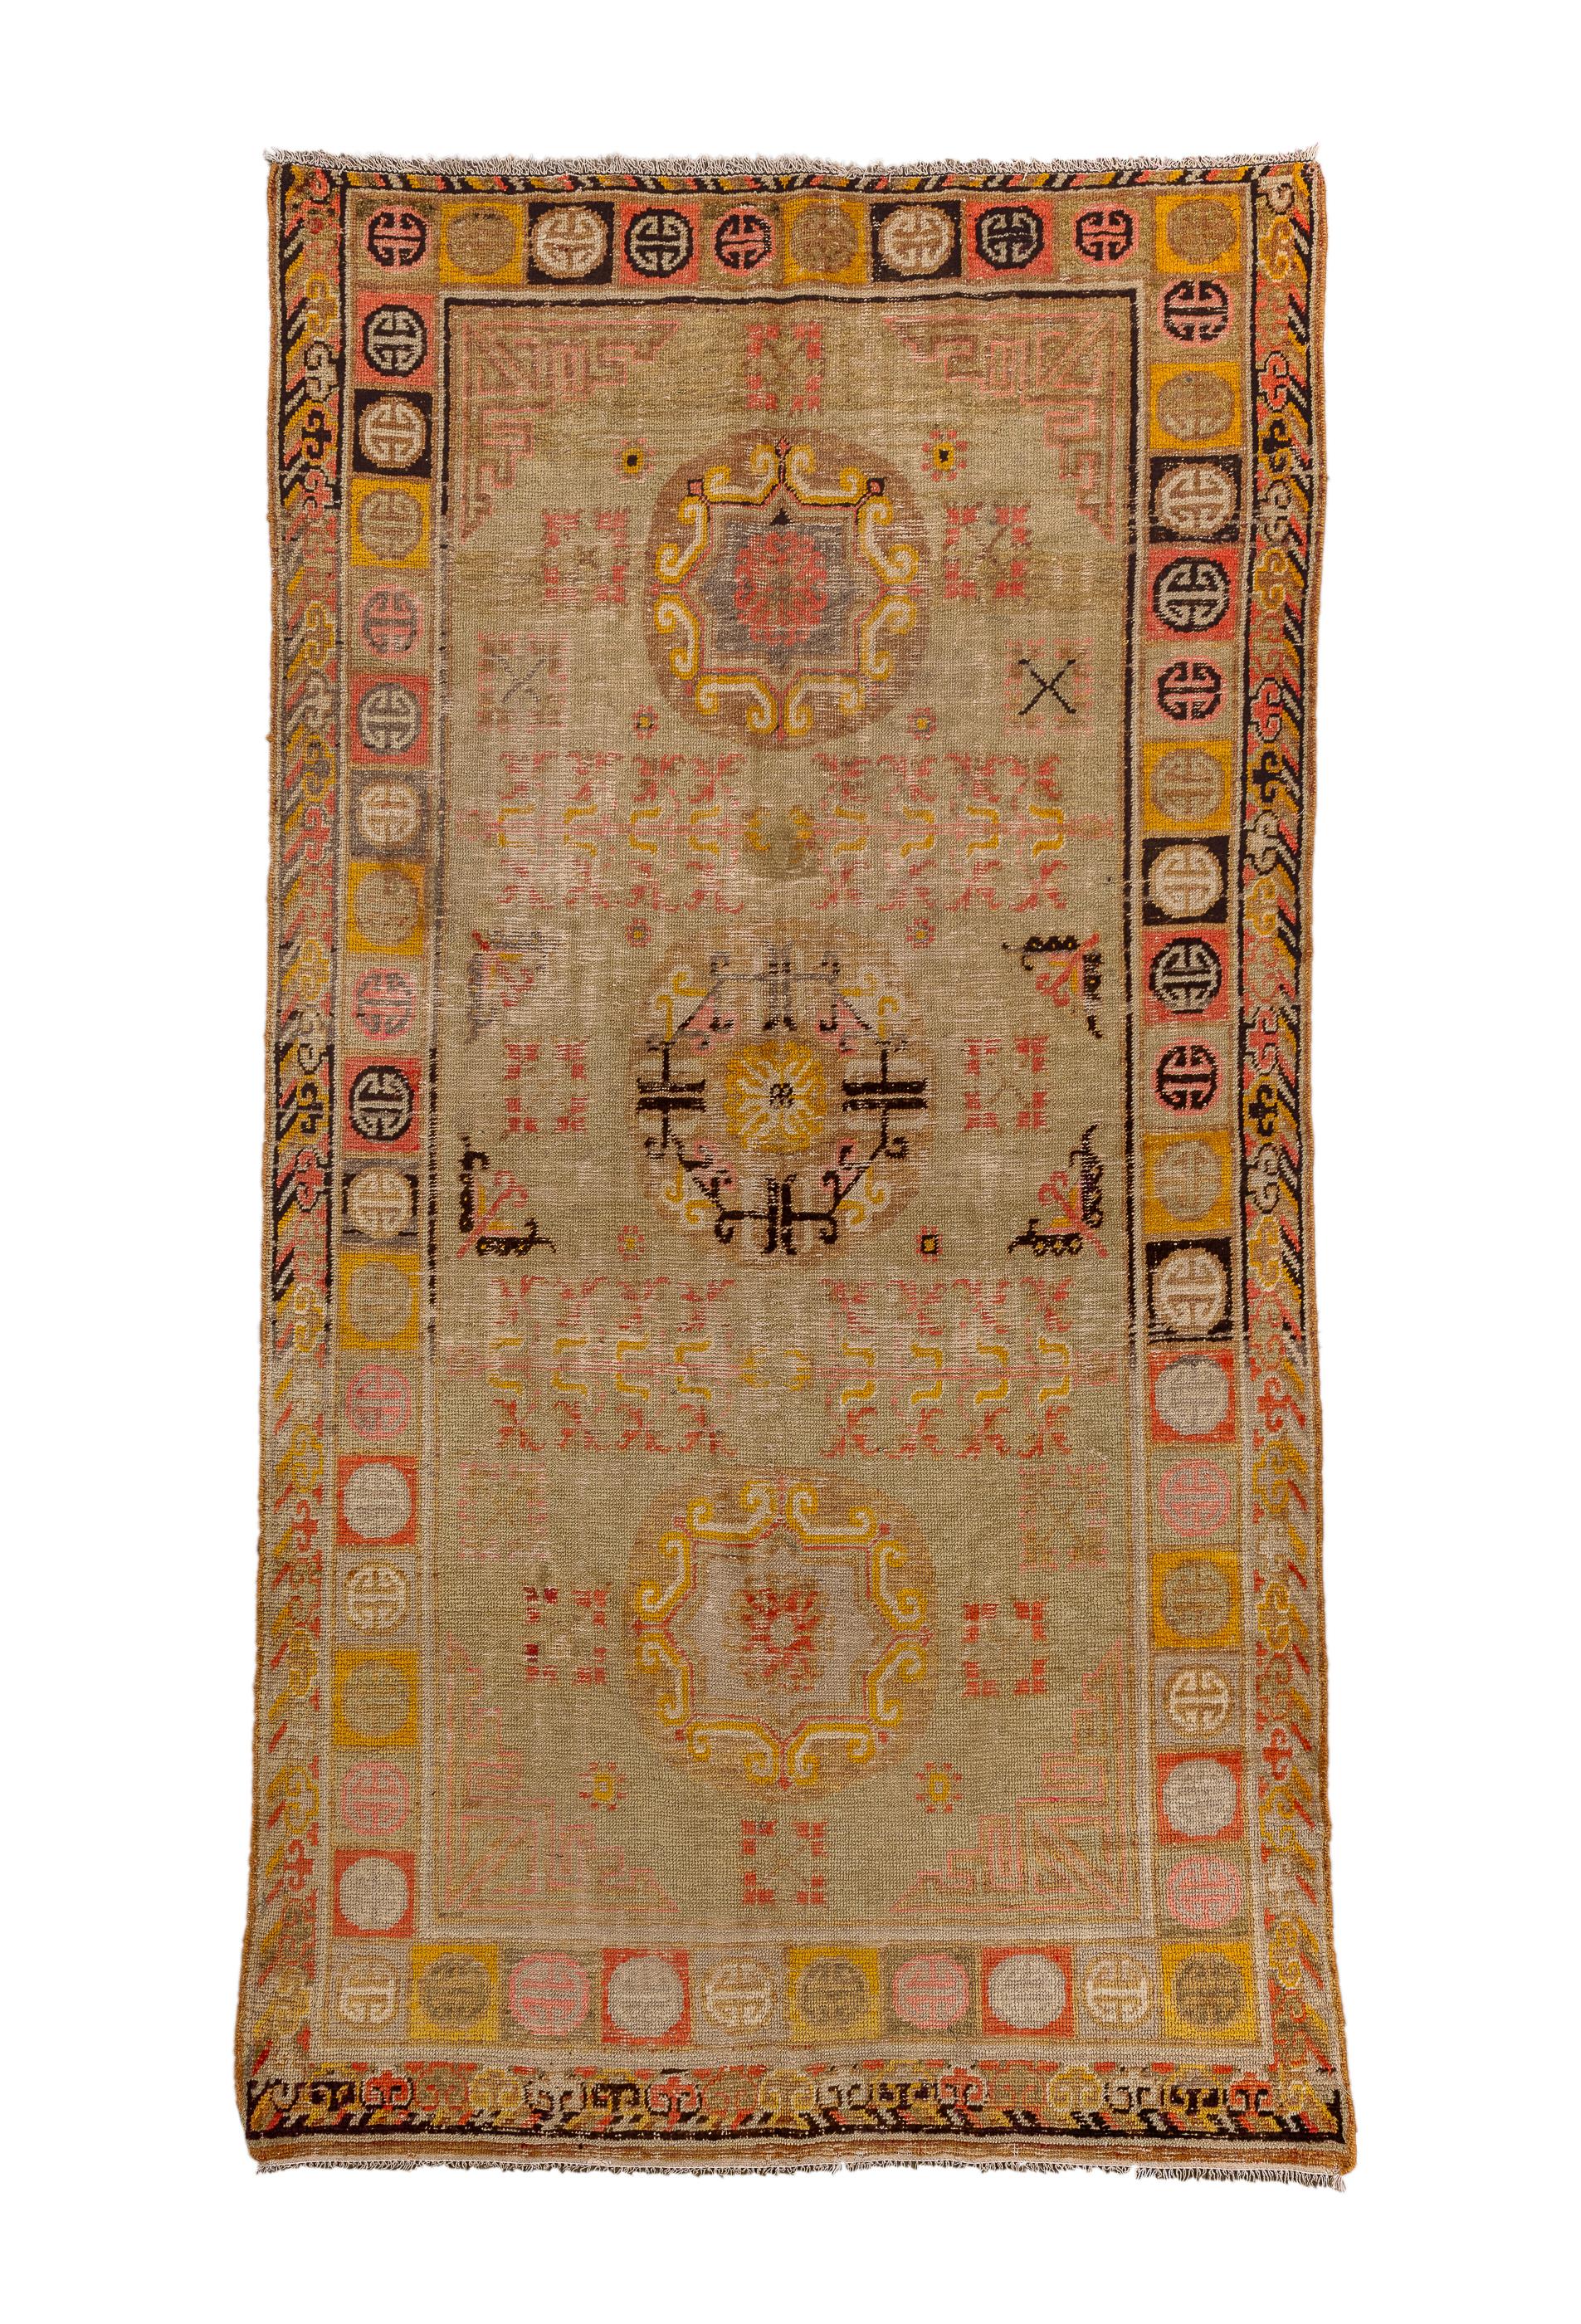 The straw beige field displays a characteristic three moon medallion pattern, with two moons enclosing octogramme motives.  Supporting scatter with butterflies, leaves and flower arrays.  Main border of squares  displaying simplified “Shou”